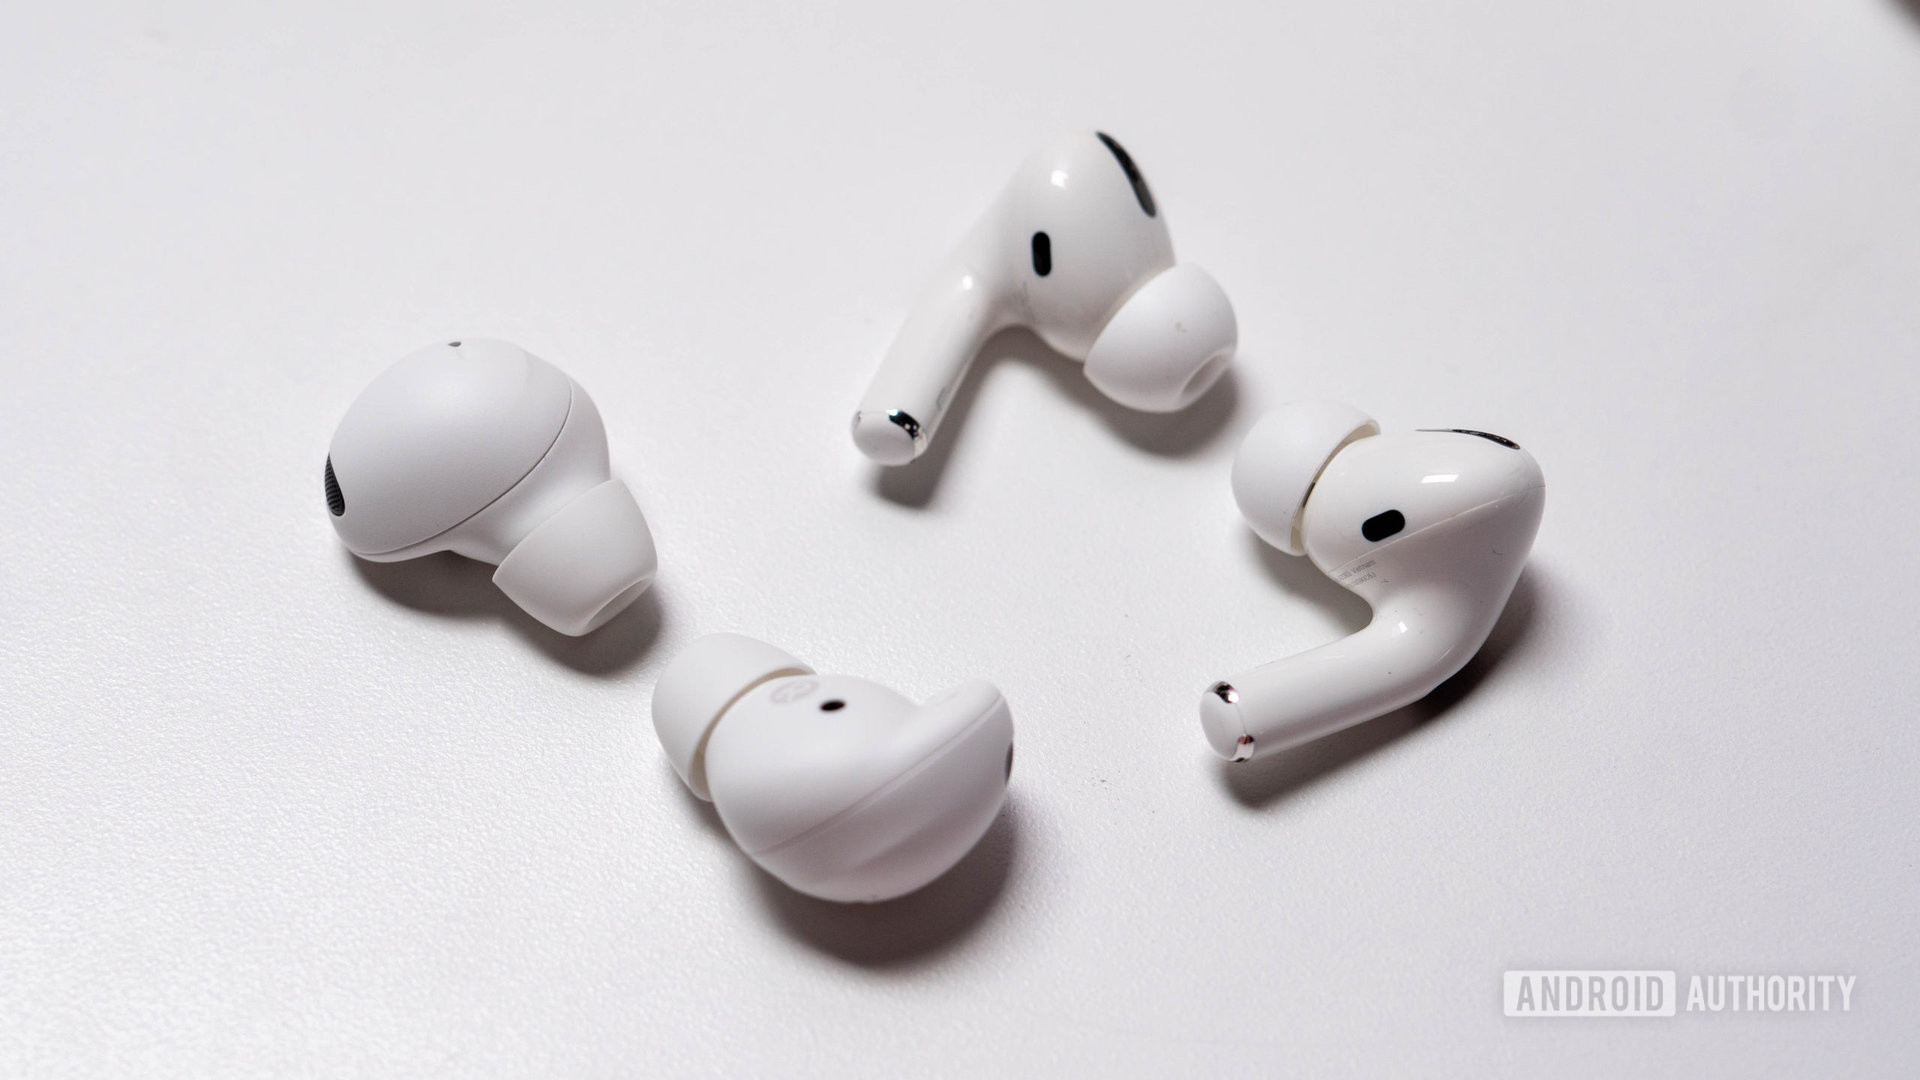 Samsung Galaxy Buds Pro vs Apple AirPods Pro (1st gen): Which should you buy?